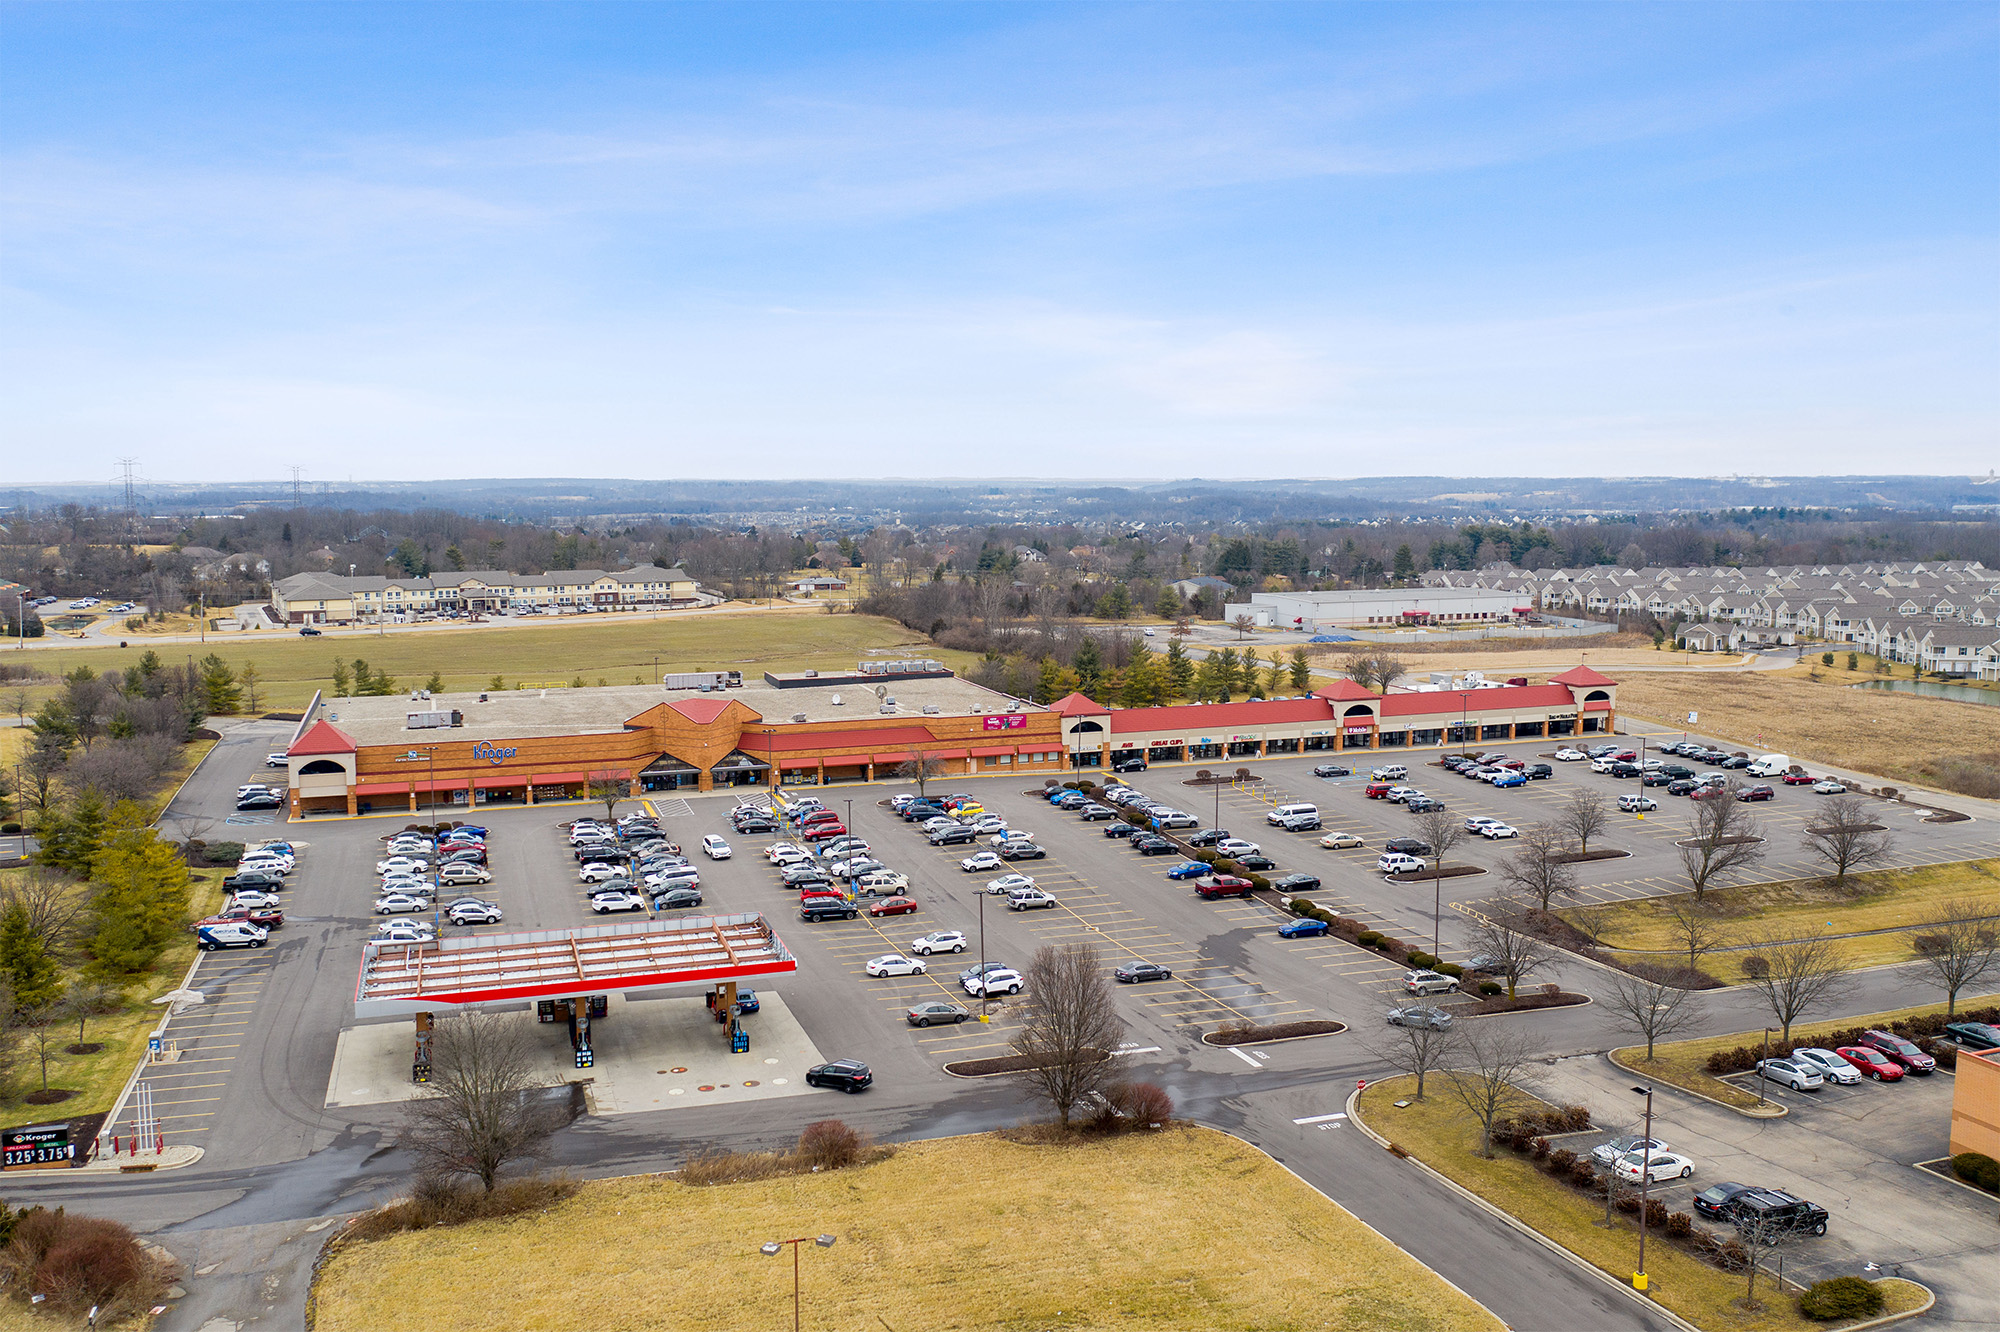 Drone view of Shoppes of Mason storefronts and Kroger gas station.